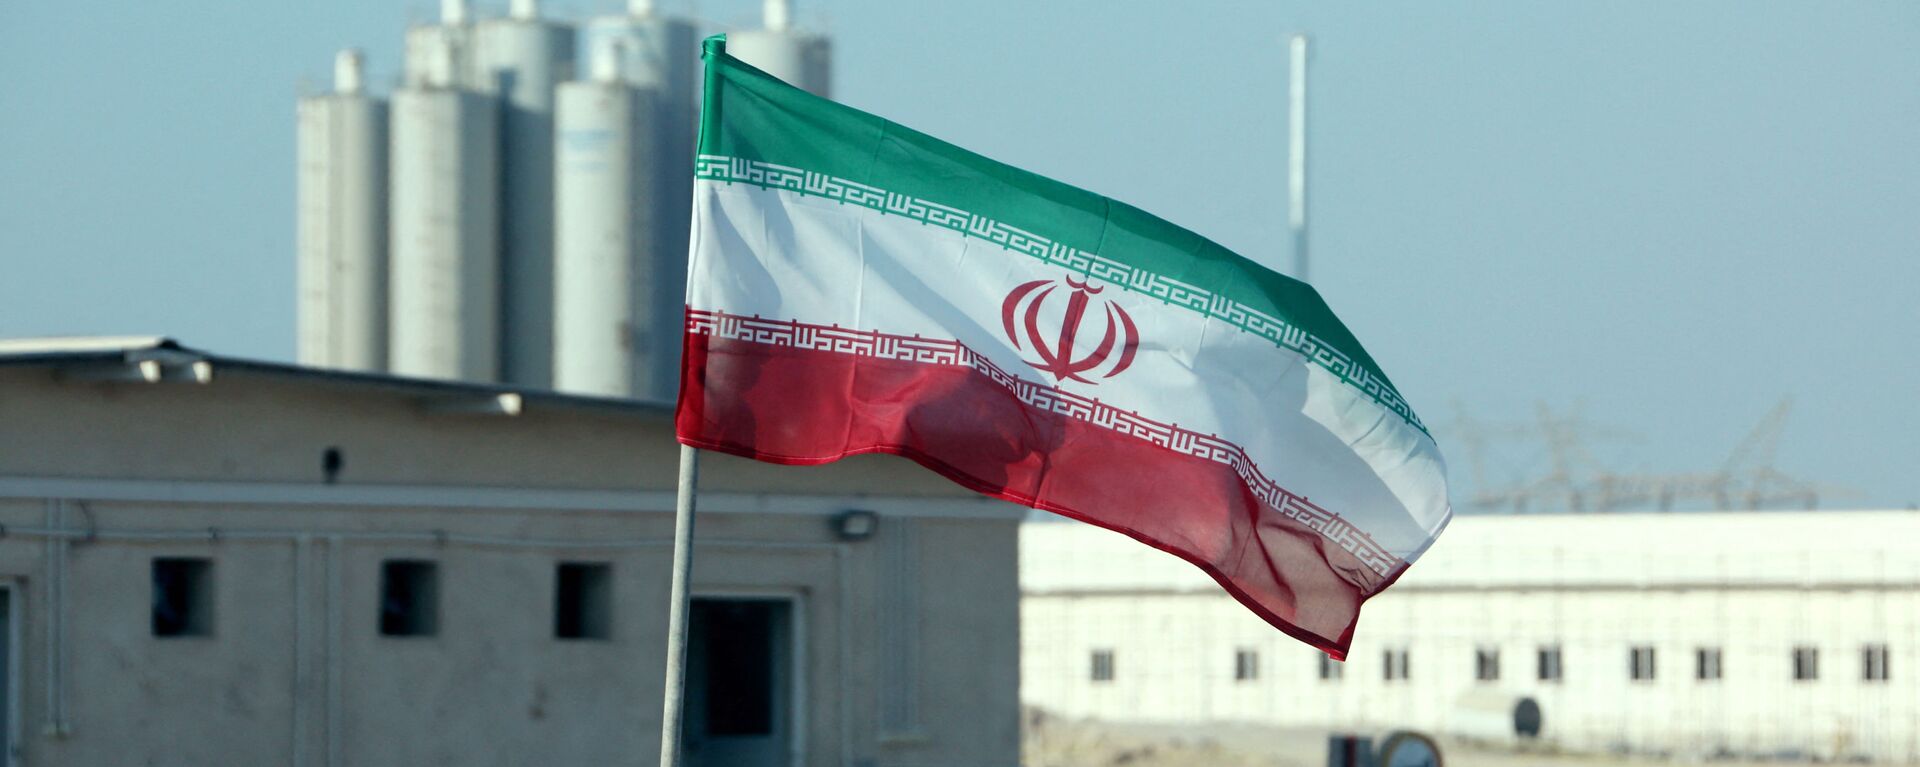 A picture taken on November 10, 2019, shows an Iranian flag in Iran's Bushehr nuclear power plant, during an official ceremony to kick-start works on a second reactor at the facility - Sputnik International, 1920, 22.12.2021